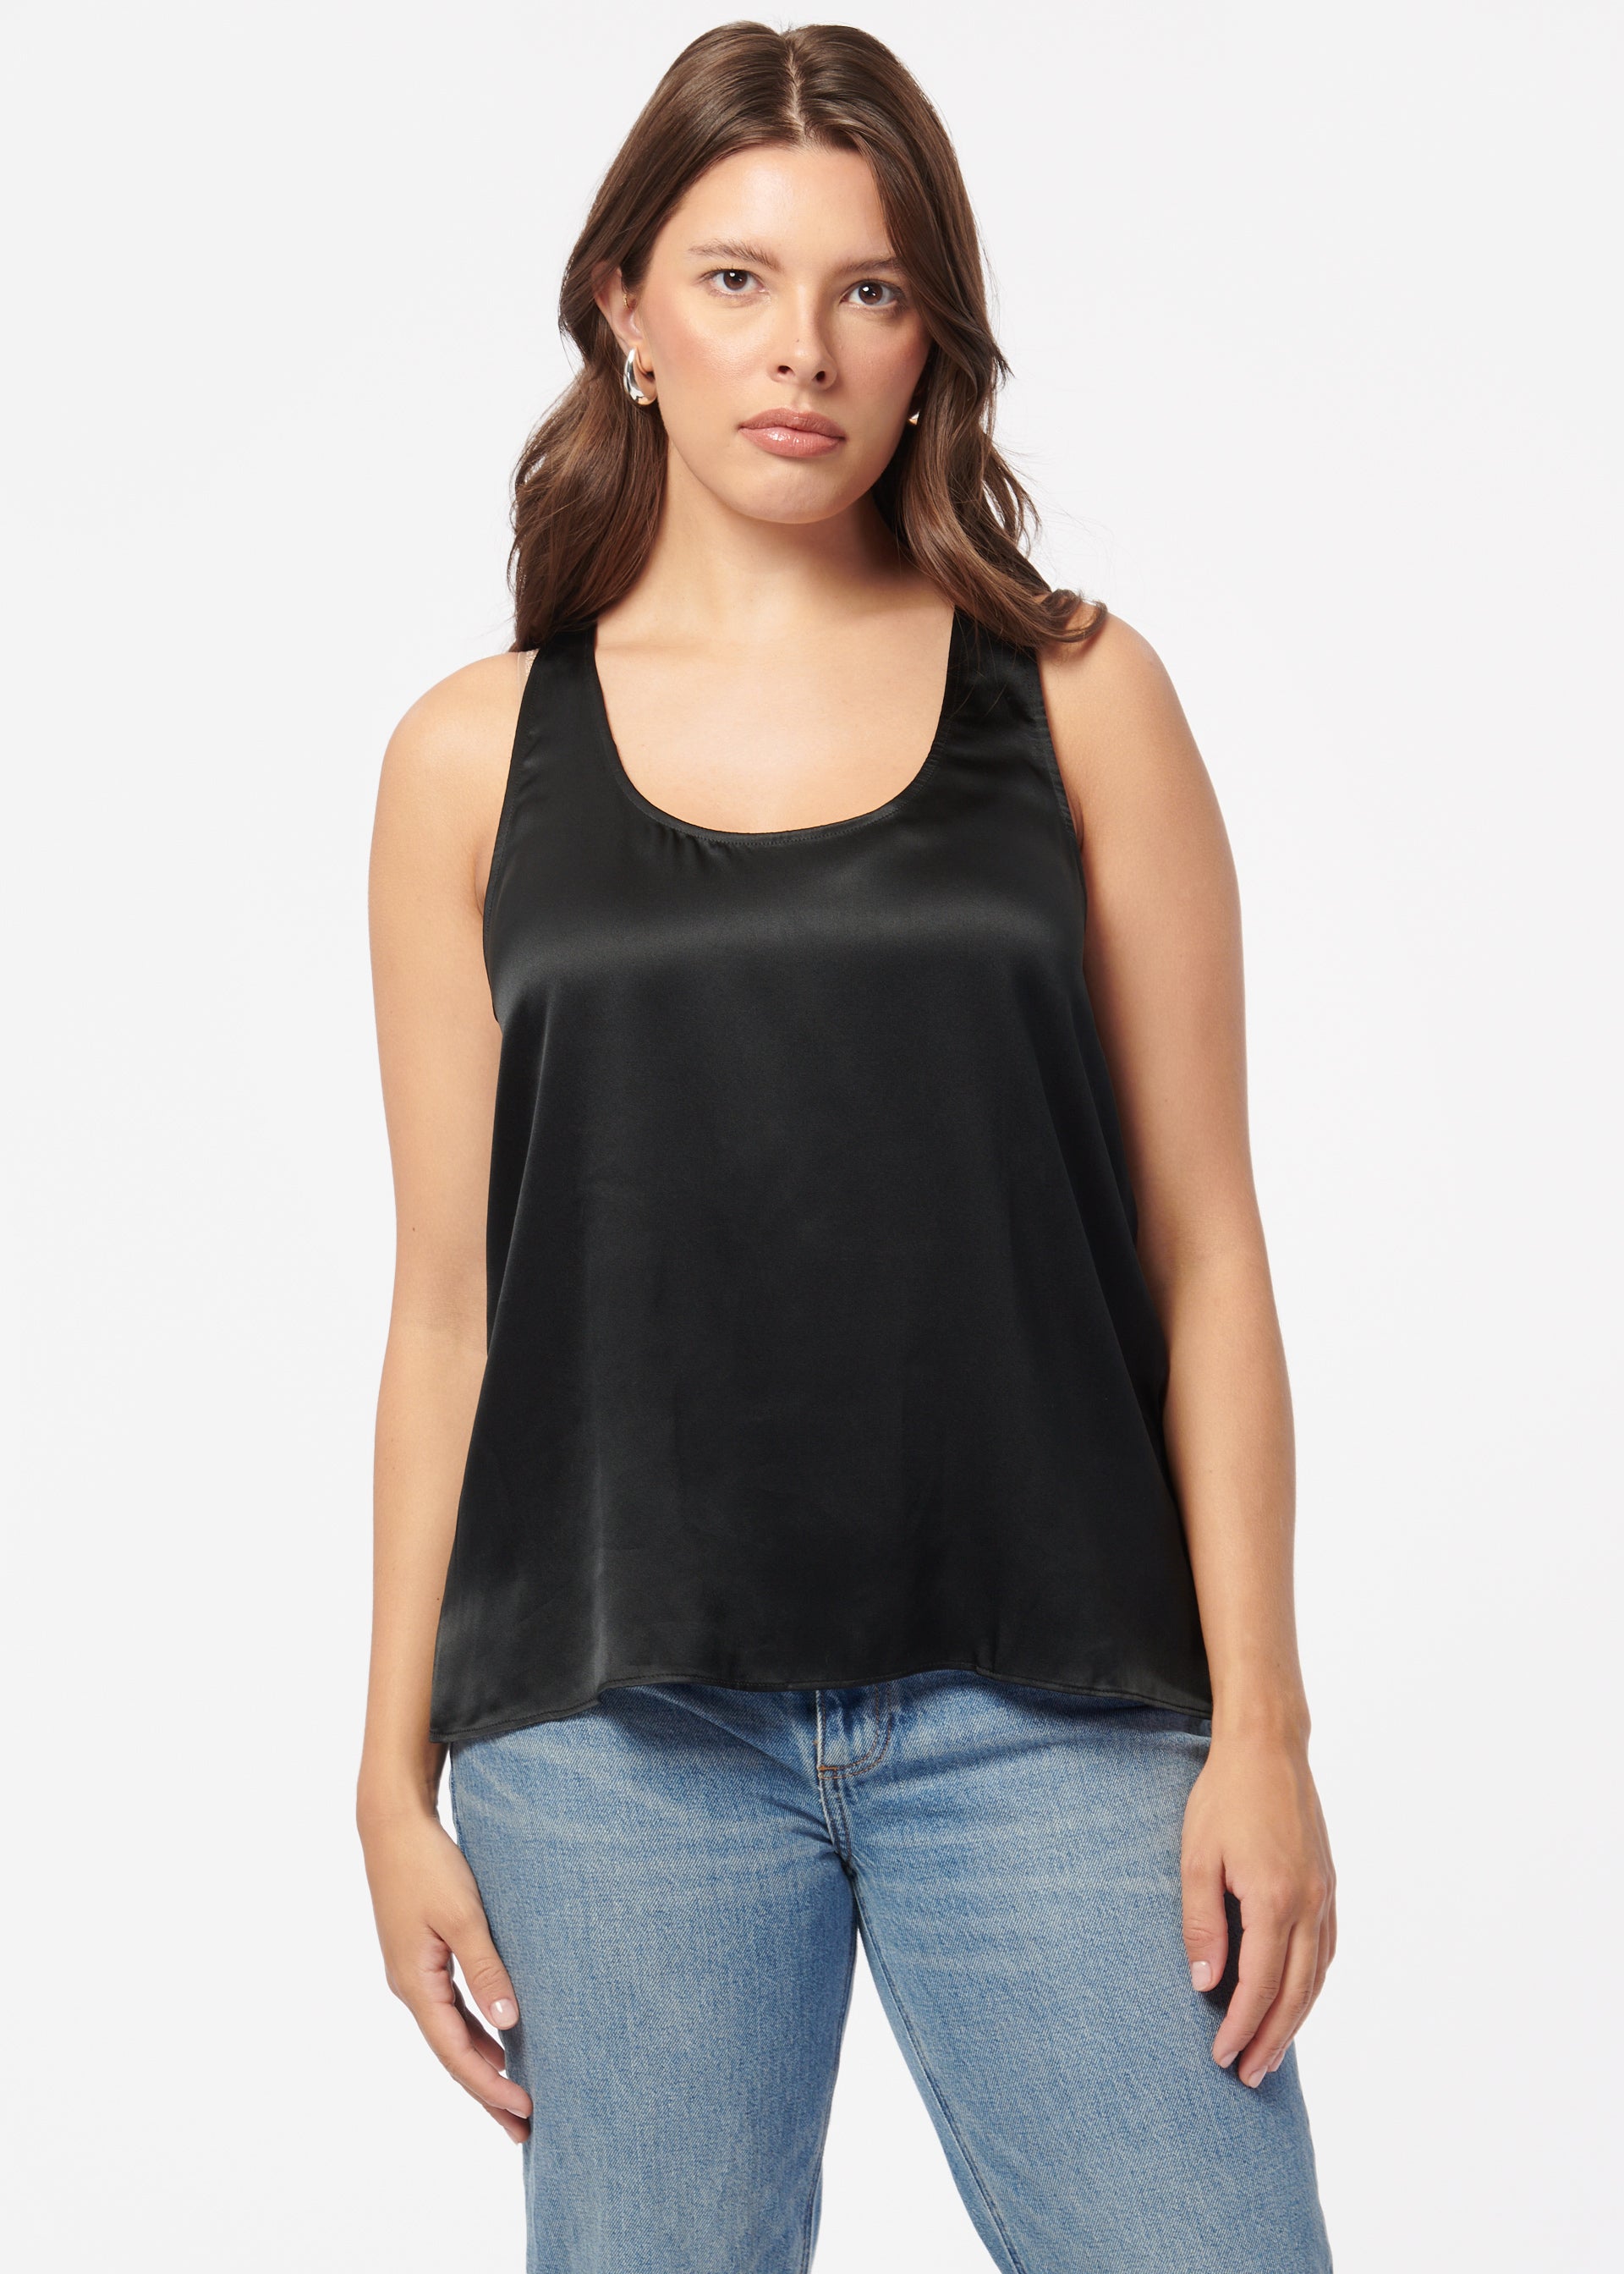 Cami NYC Sweetheart Camisole in Black - Meghan's Mirror